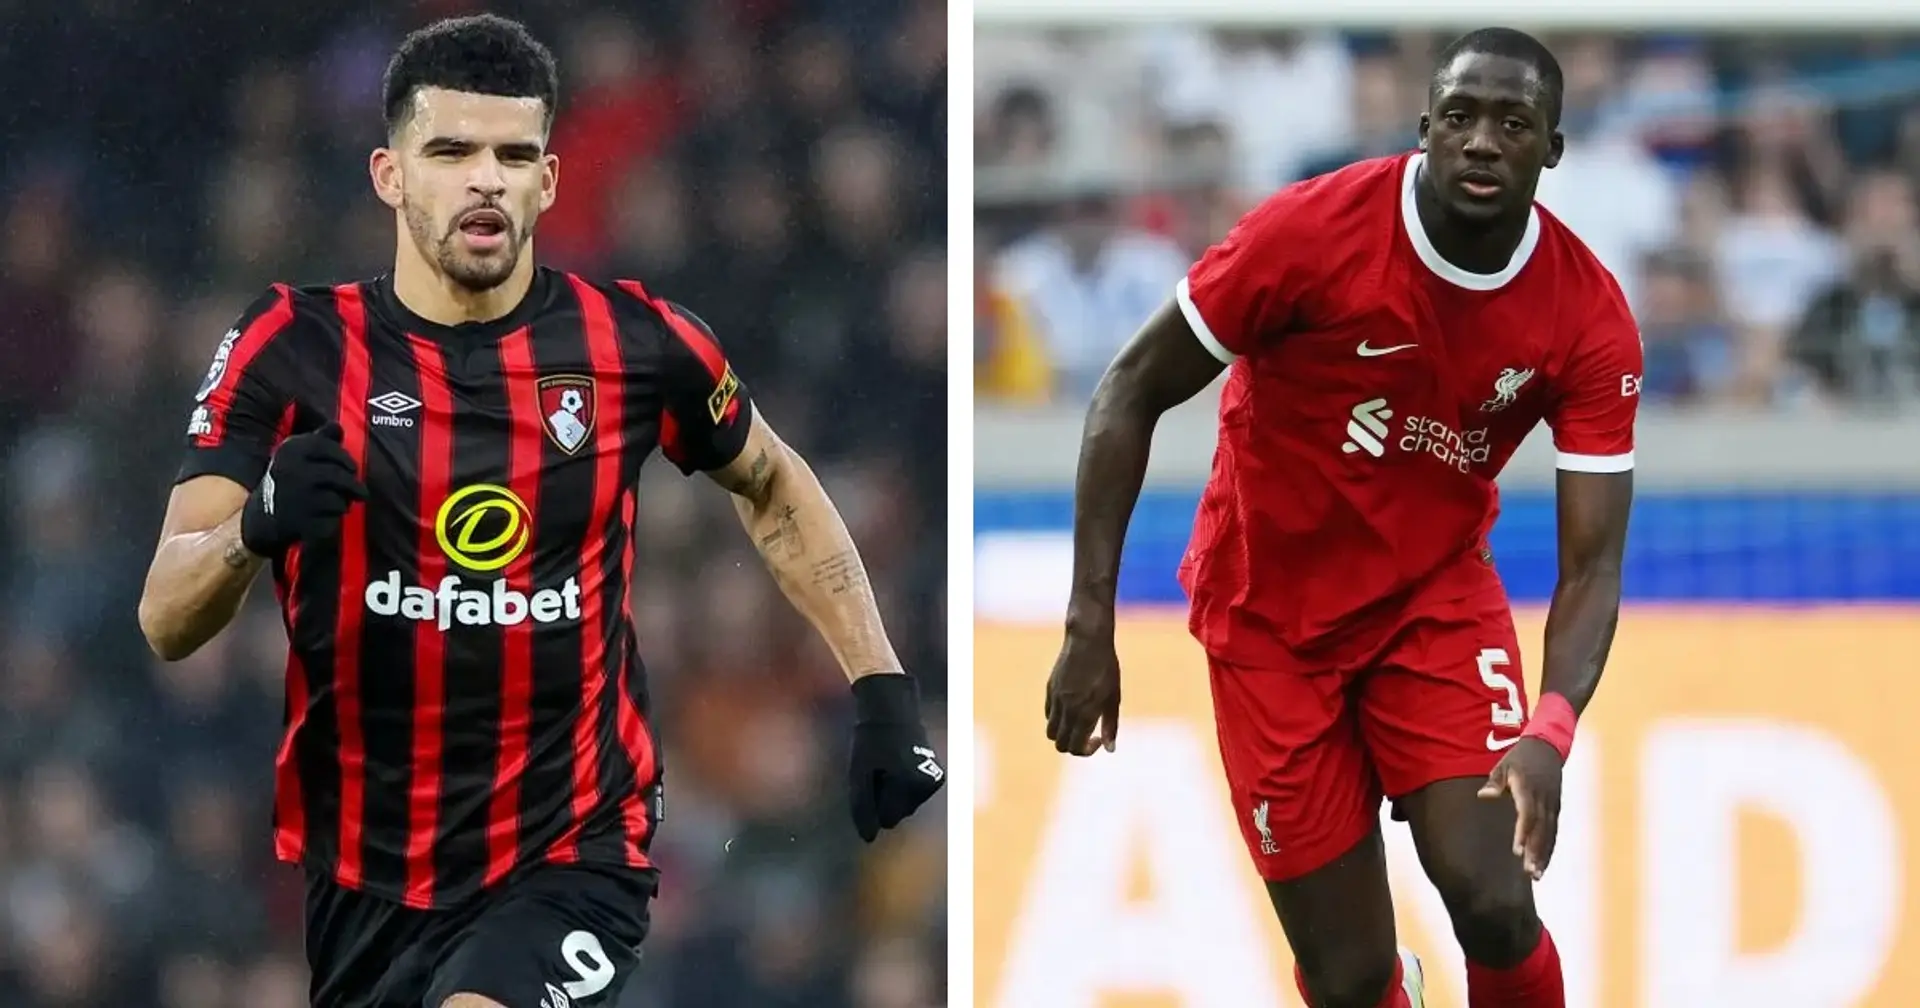 'He's scored six goals last month': Konate on facing in-form Solanke 